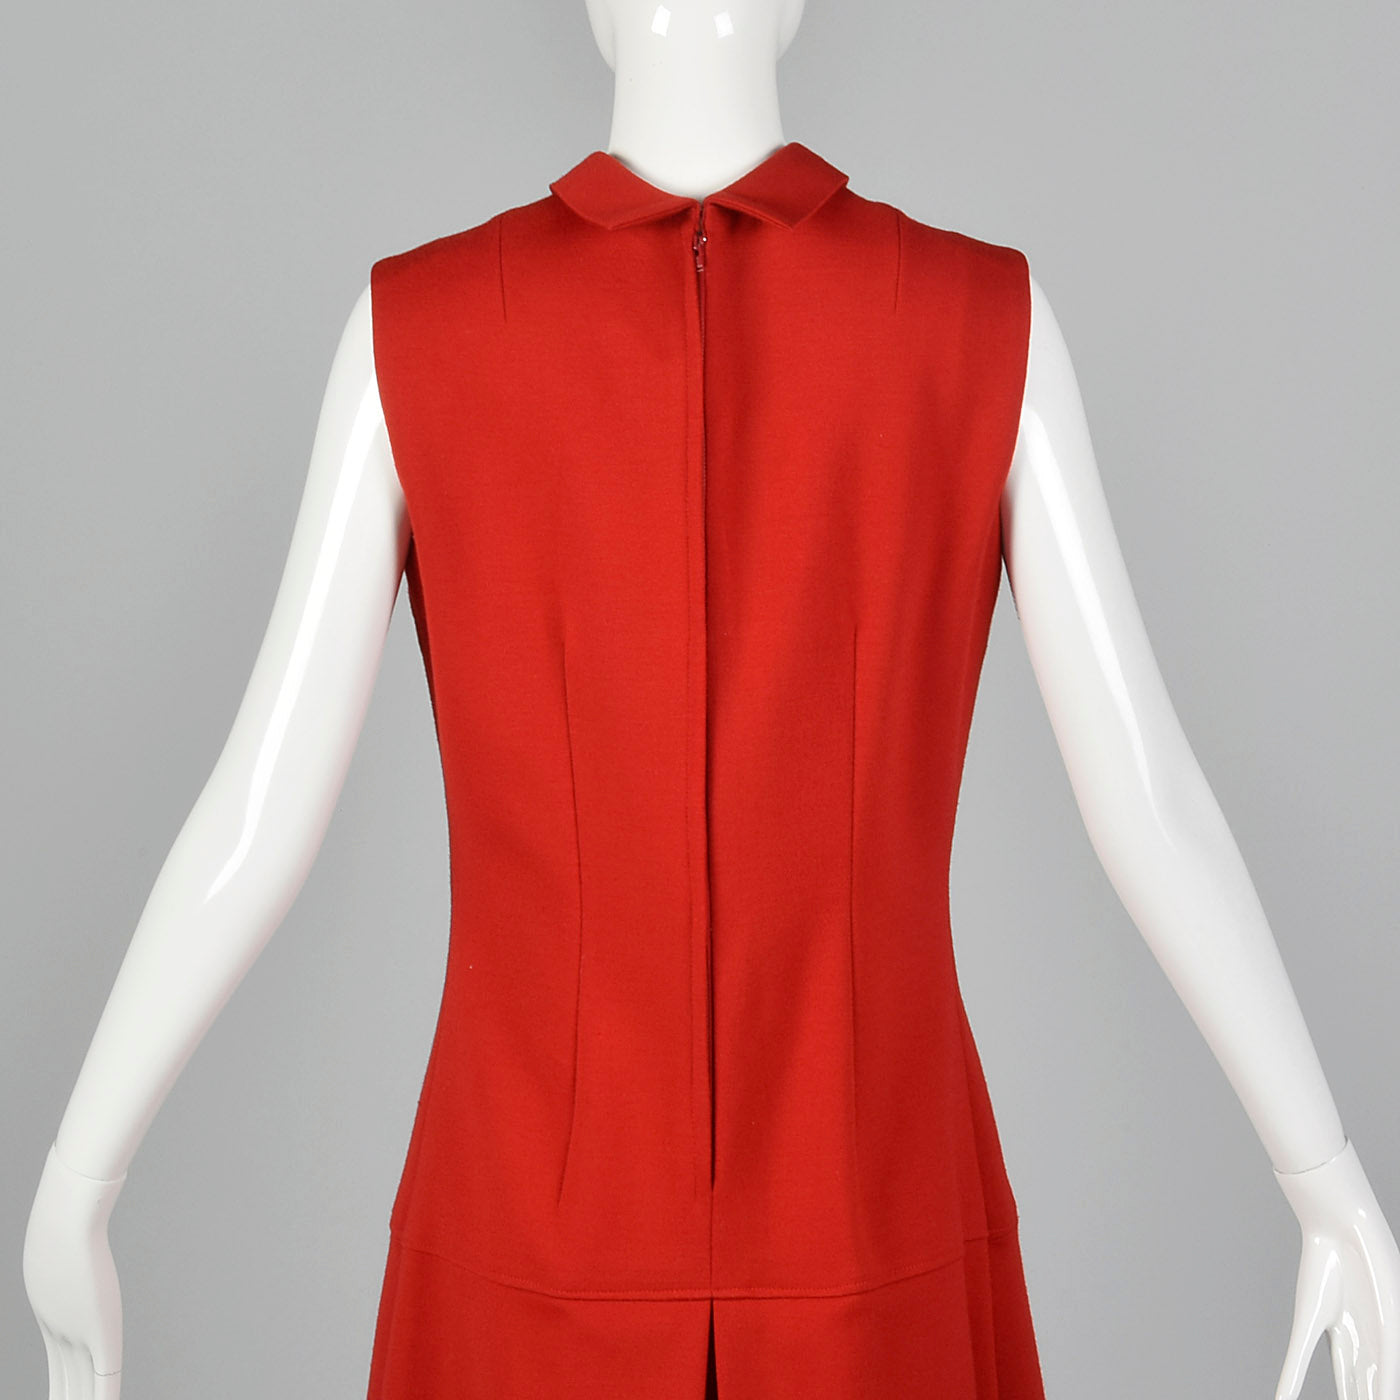 1970s Red Shift Dress with Drop Waist